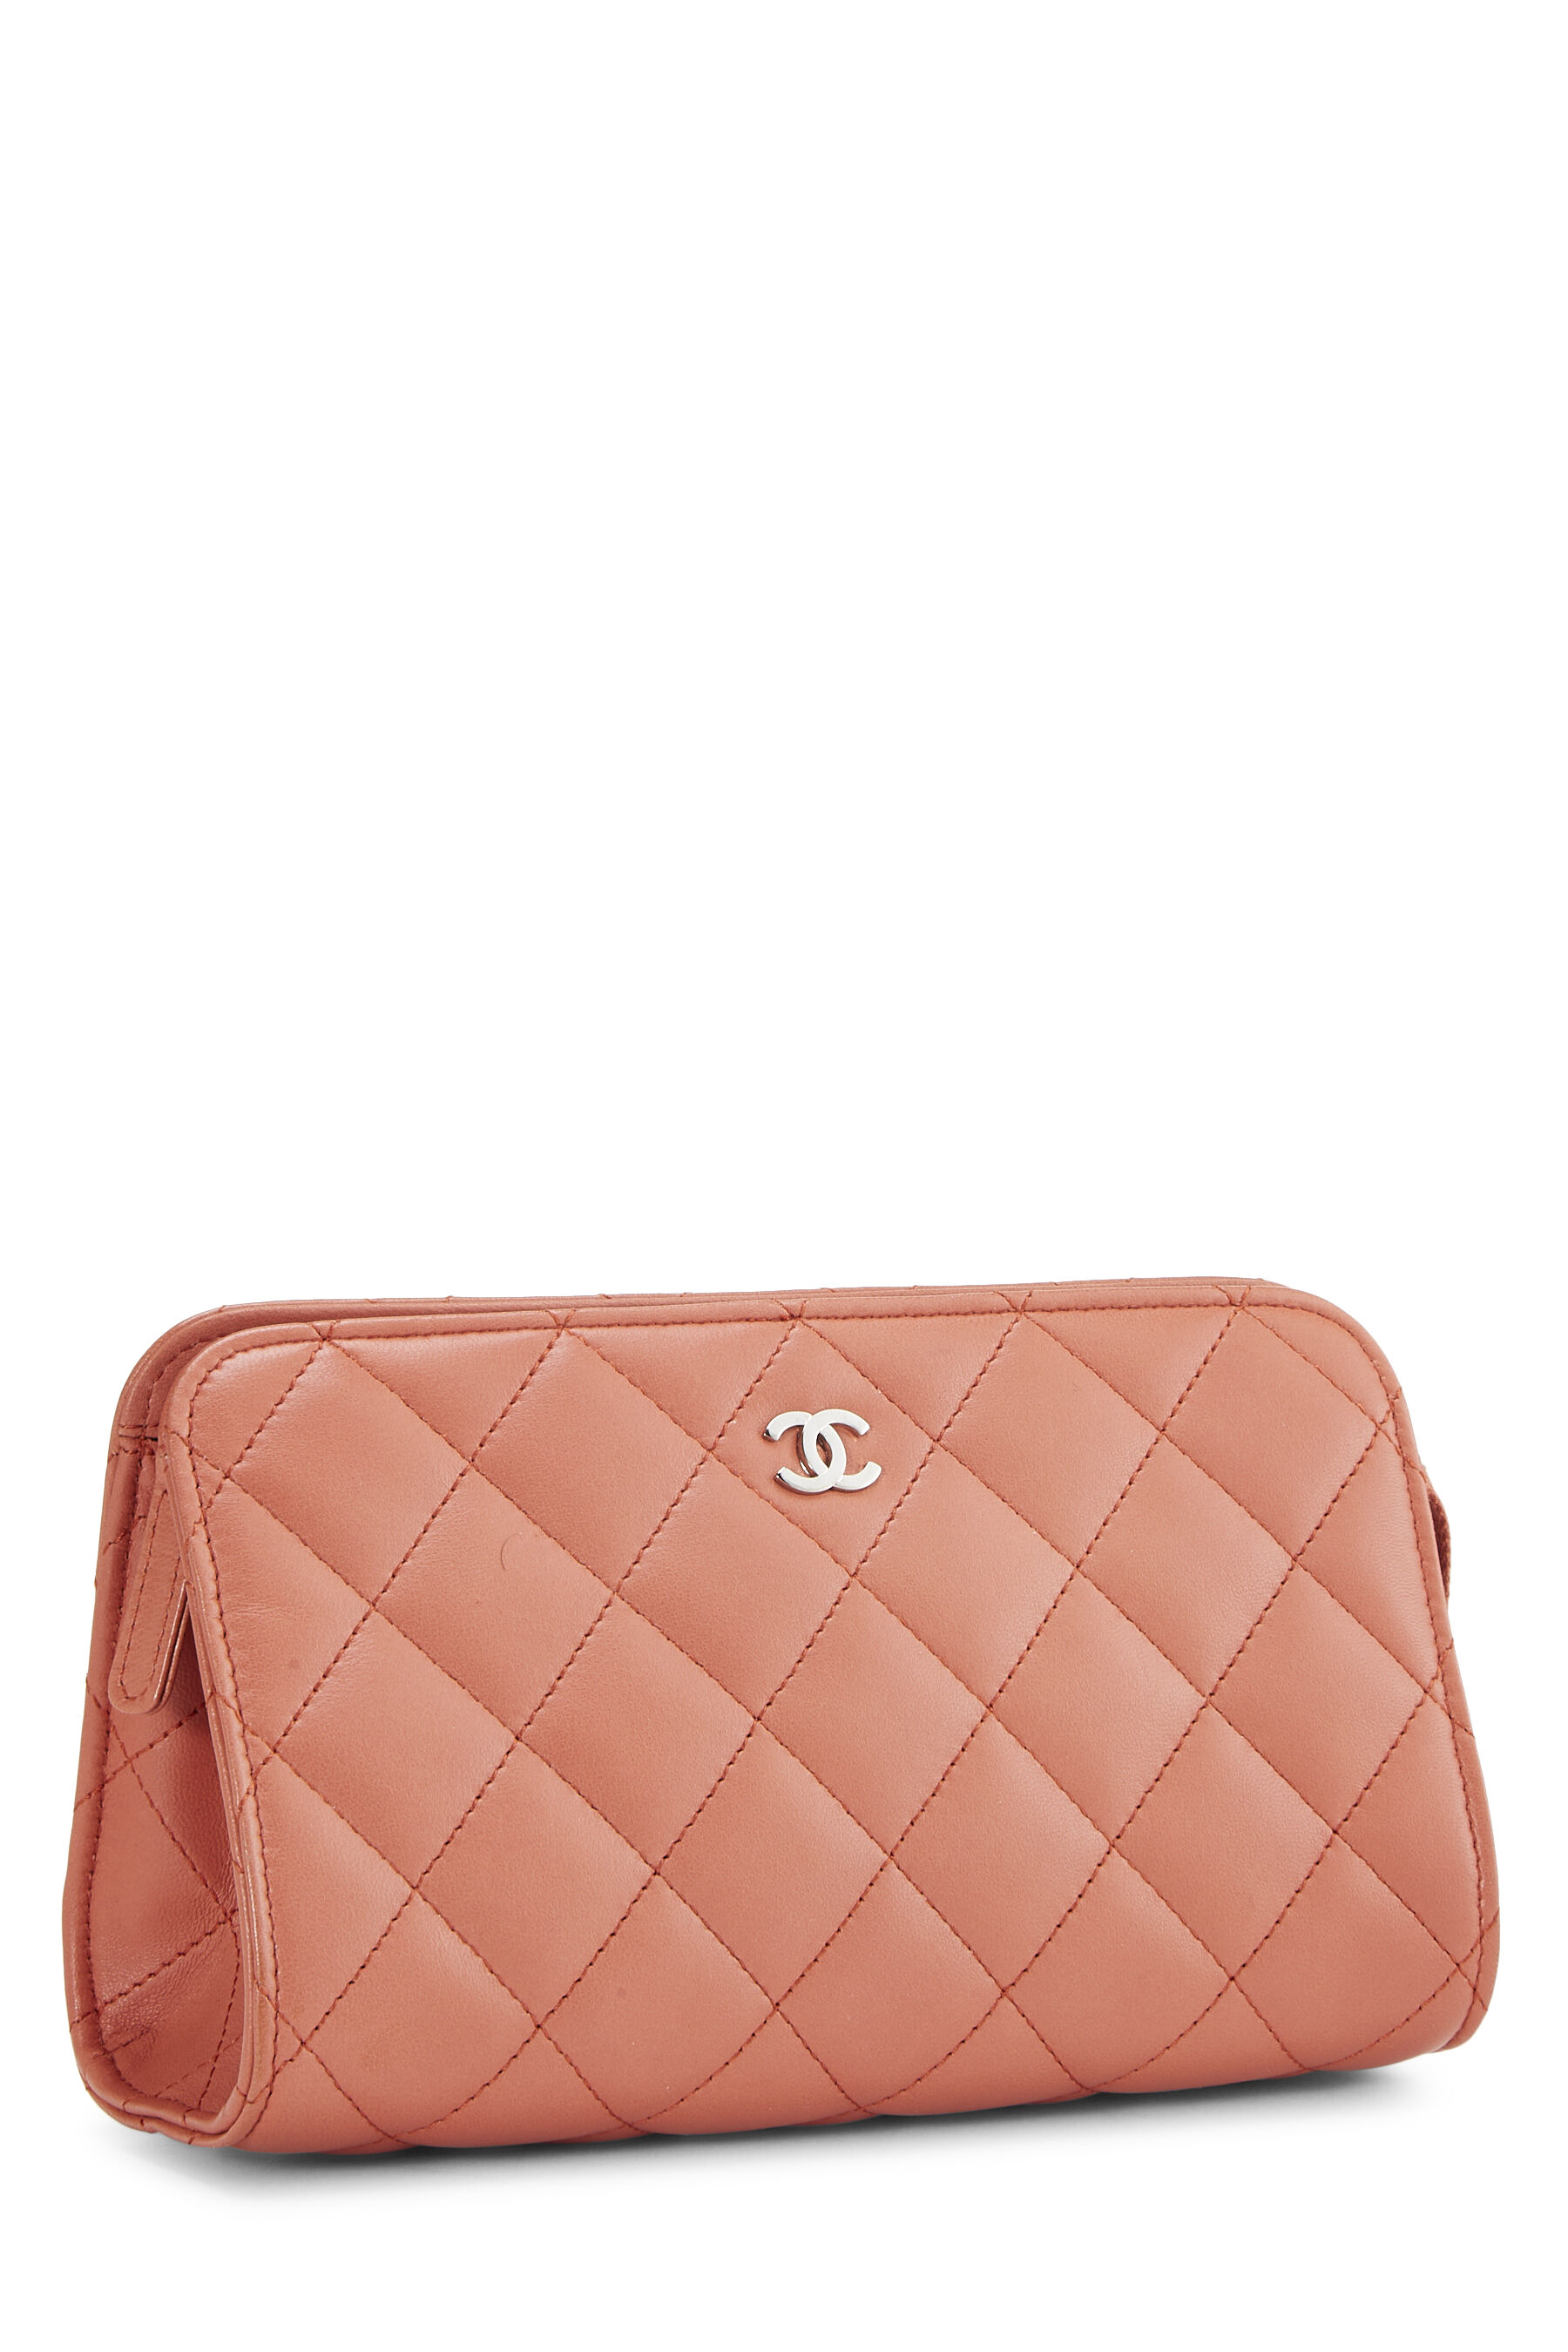 Chanel - Orange Quilted Lambskin Cosmetic Pouch